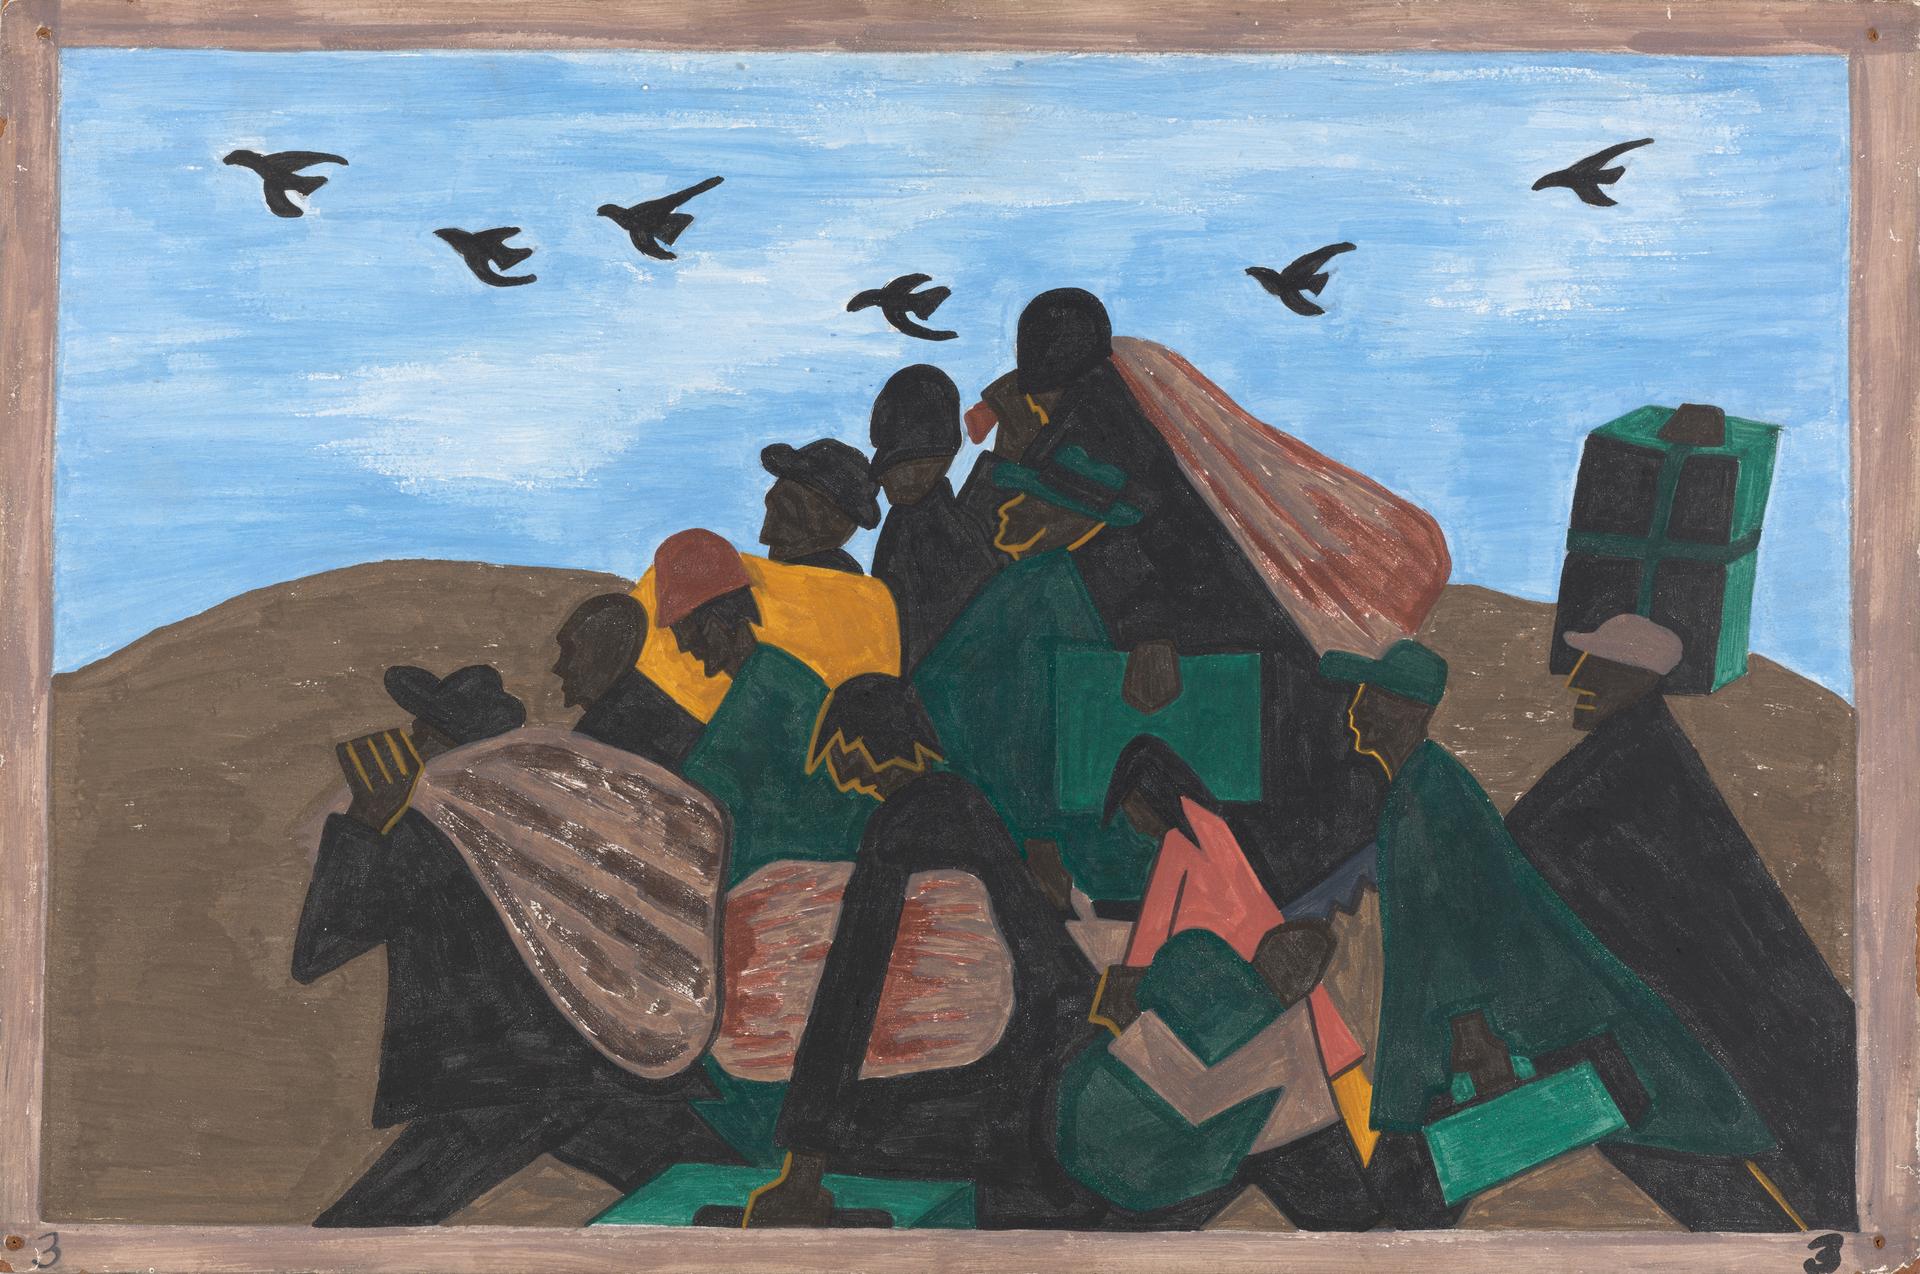 Jacob Lawrence, “The Migration Series, Panel no. 3: From every southern town migrants left by the hundreds to travel north.,” 1940–41. Casein tempera on hardboard, 12 x 18 in.